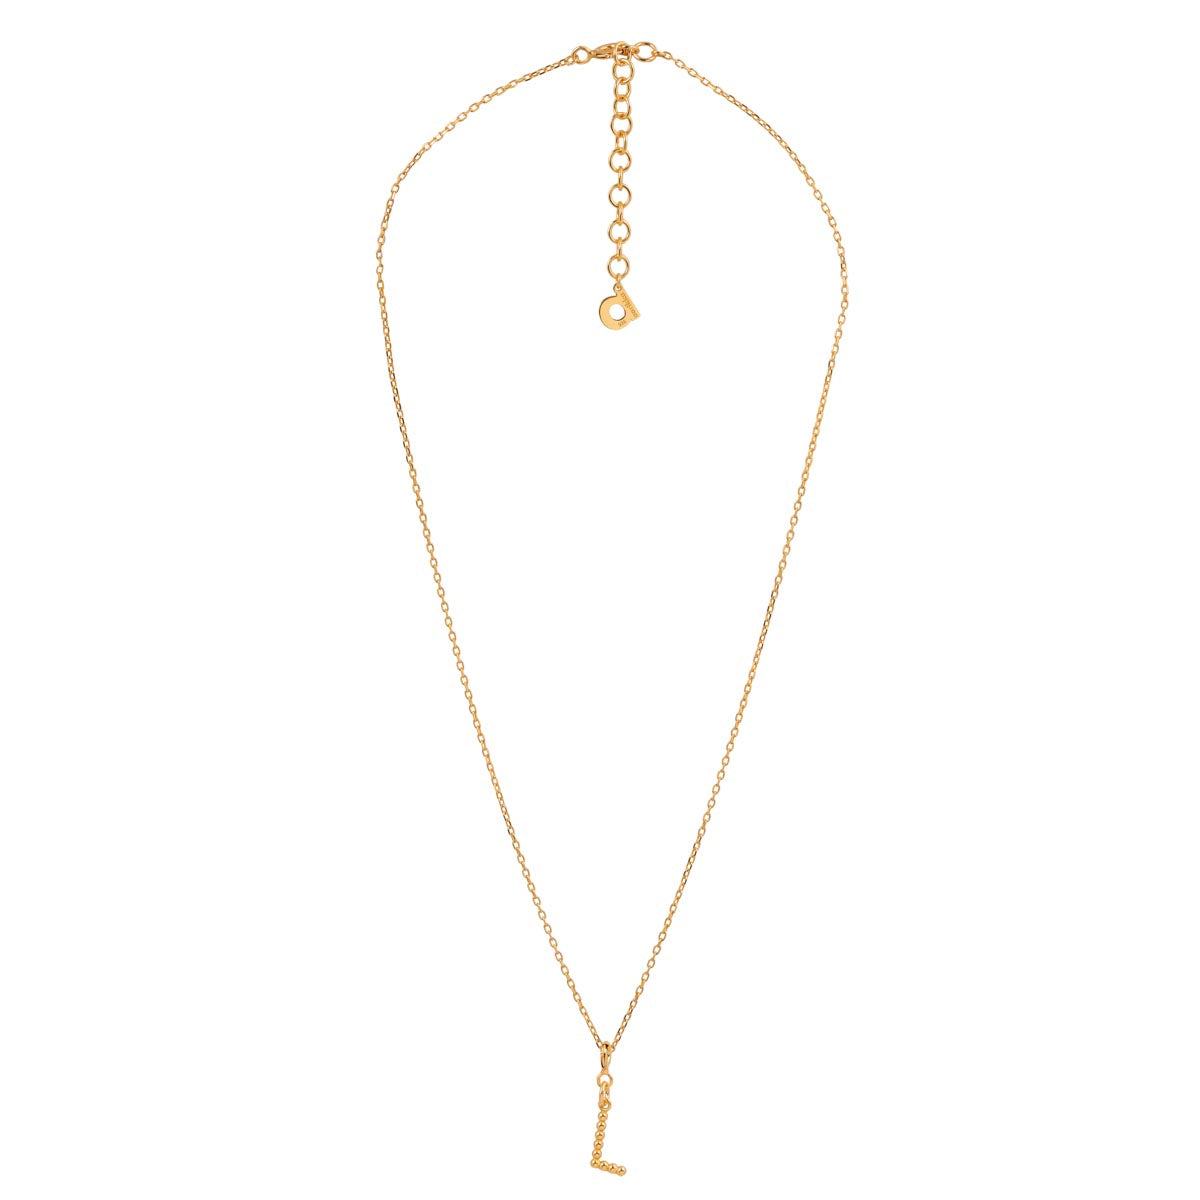 Yllätys Monogram Necklace L, gold-plated silver